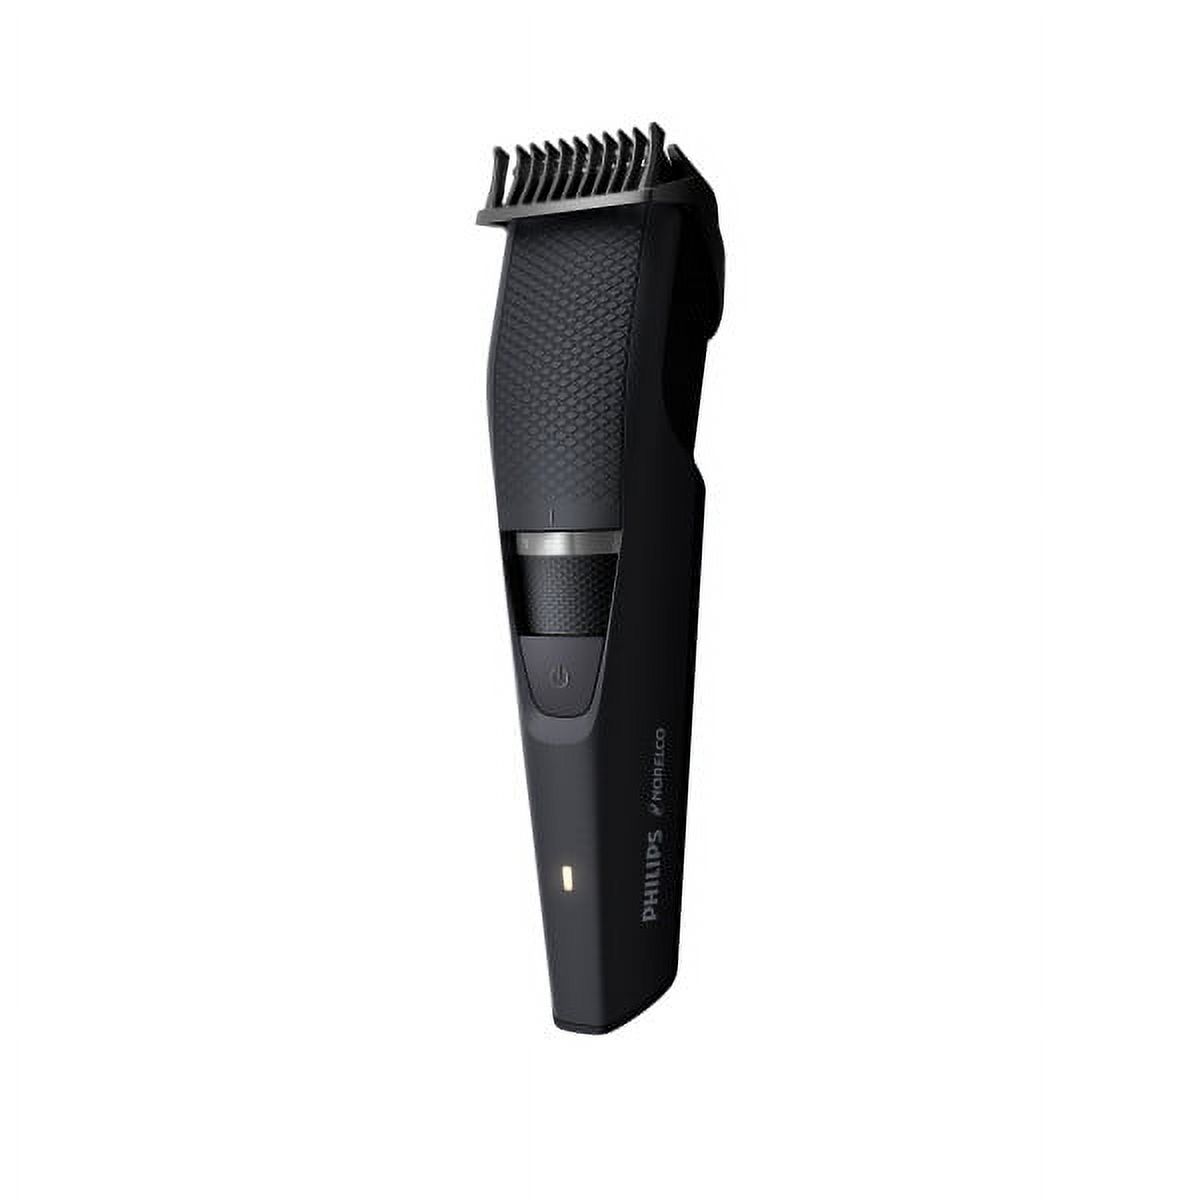 Philips Norelco Beard & Stubble Trimmer Series 3000, BT3210/41 - image 3 of 11